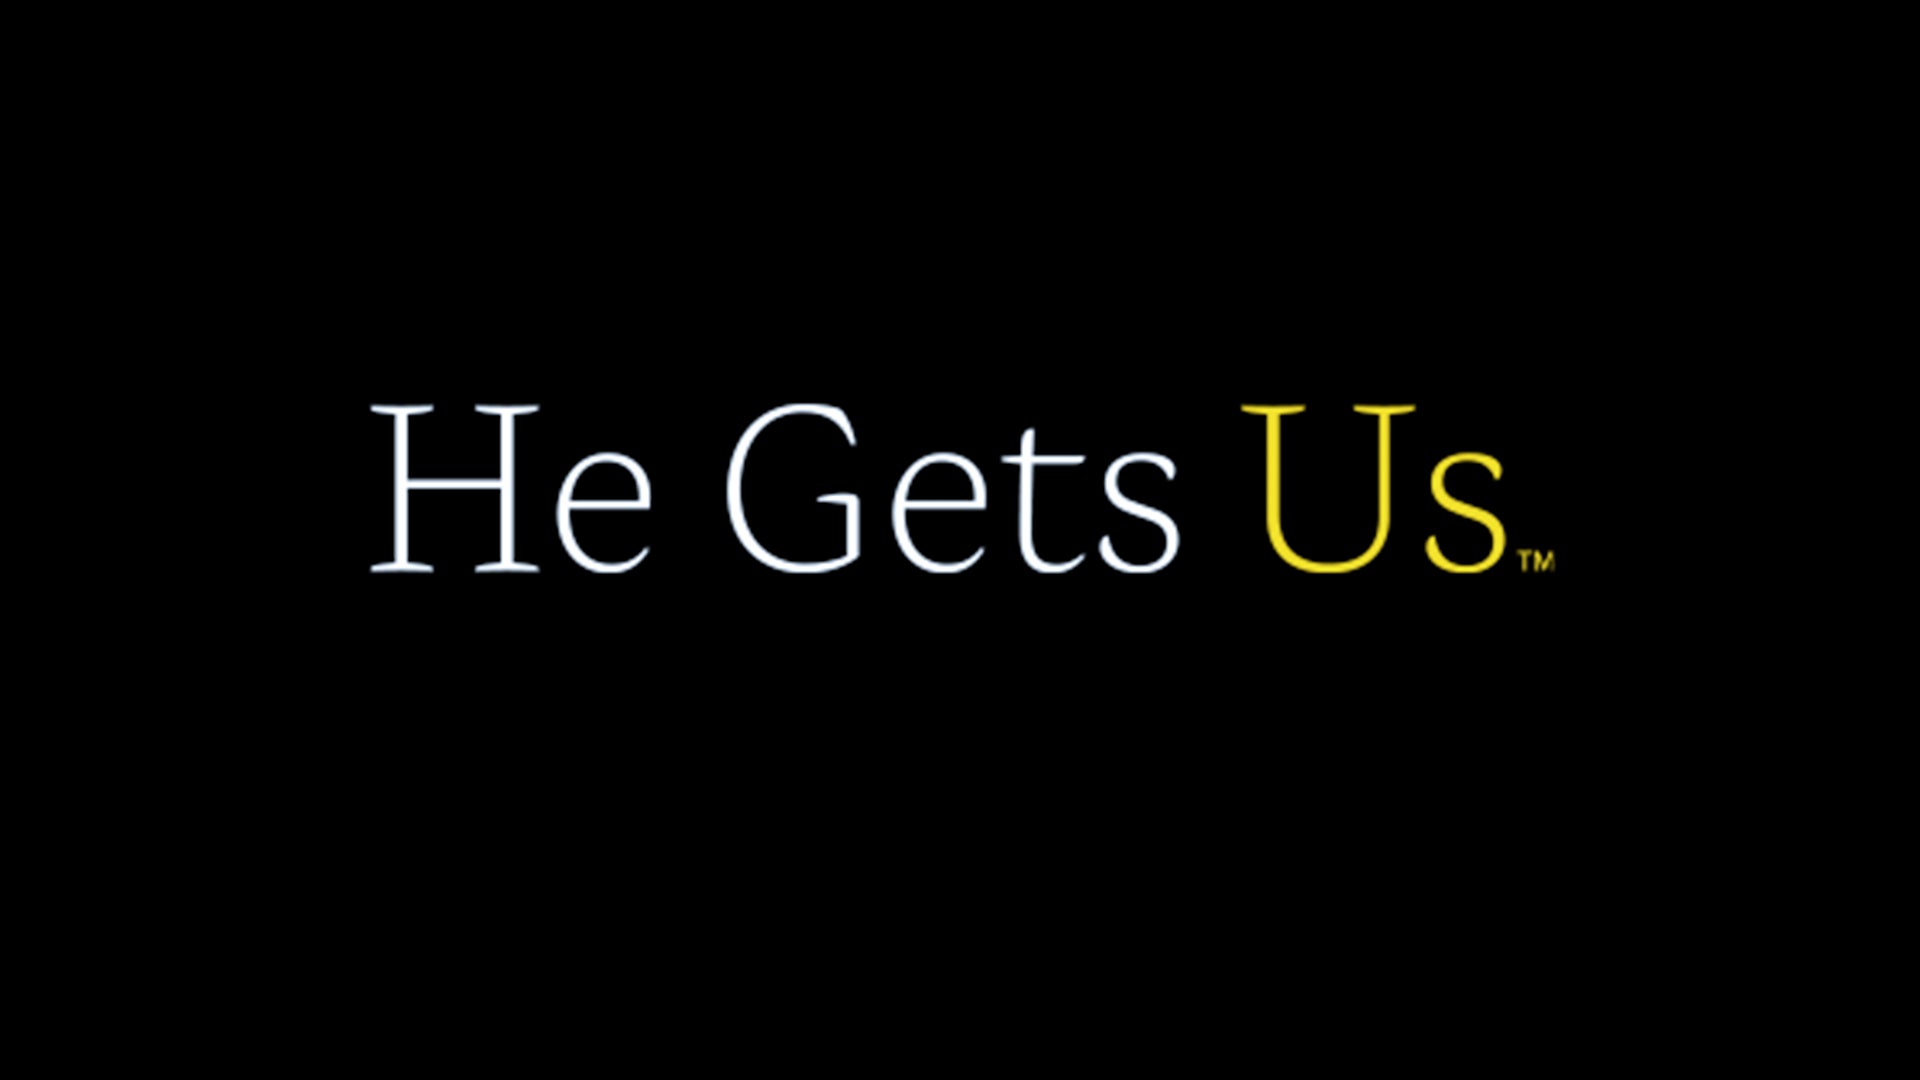 Meeting Jesus in Real Time Why the 'He Gets Us' Ads Are Just a First